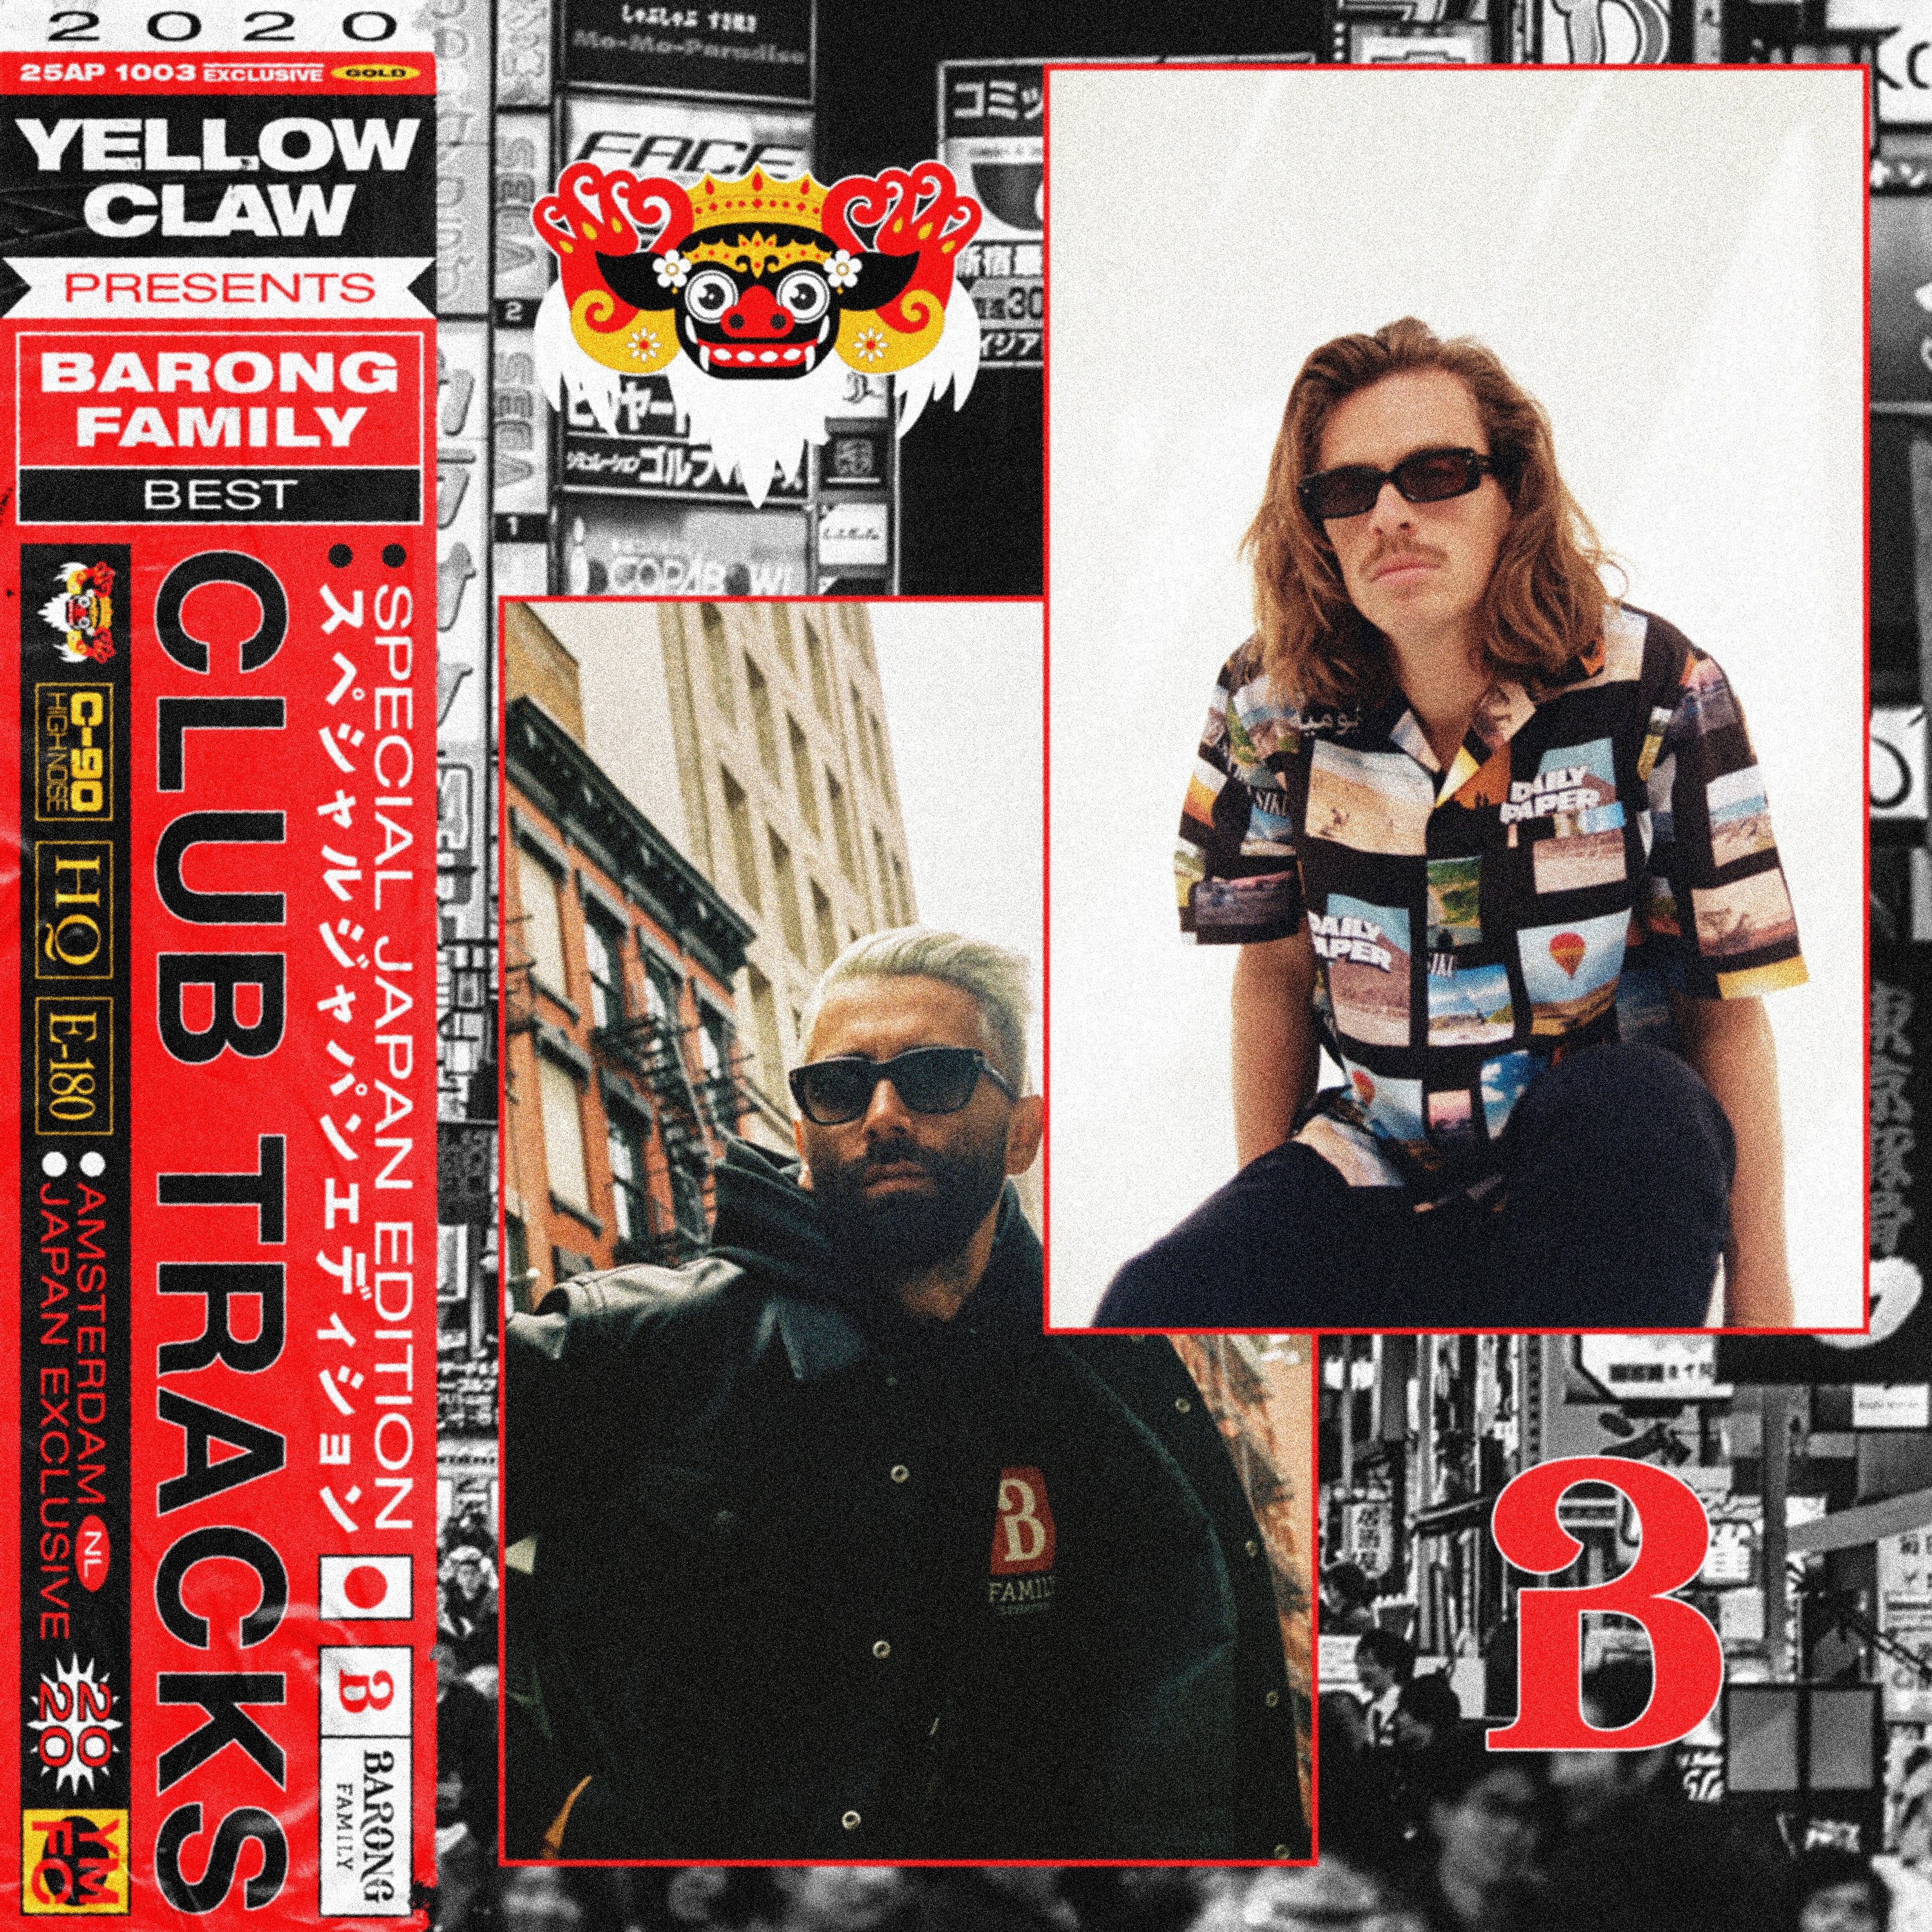 Yellow Claw Presents: Barong Family Best - Club Tracks -